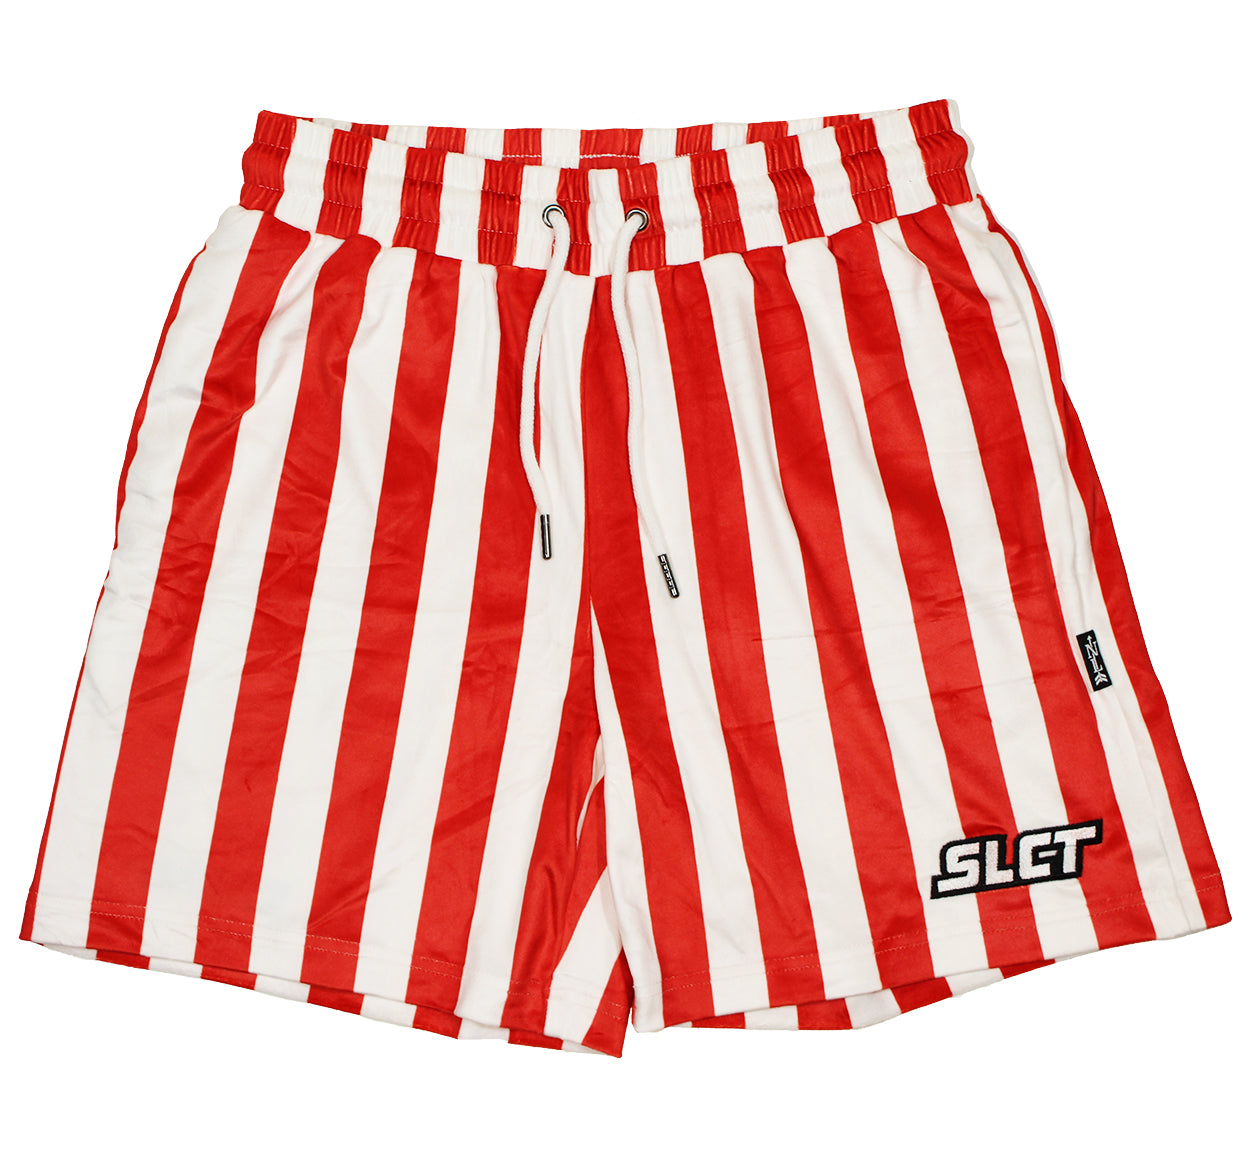 striped velour shorts in red/white with slct stock